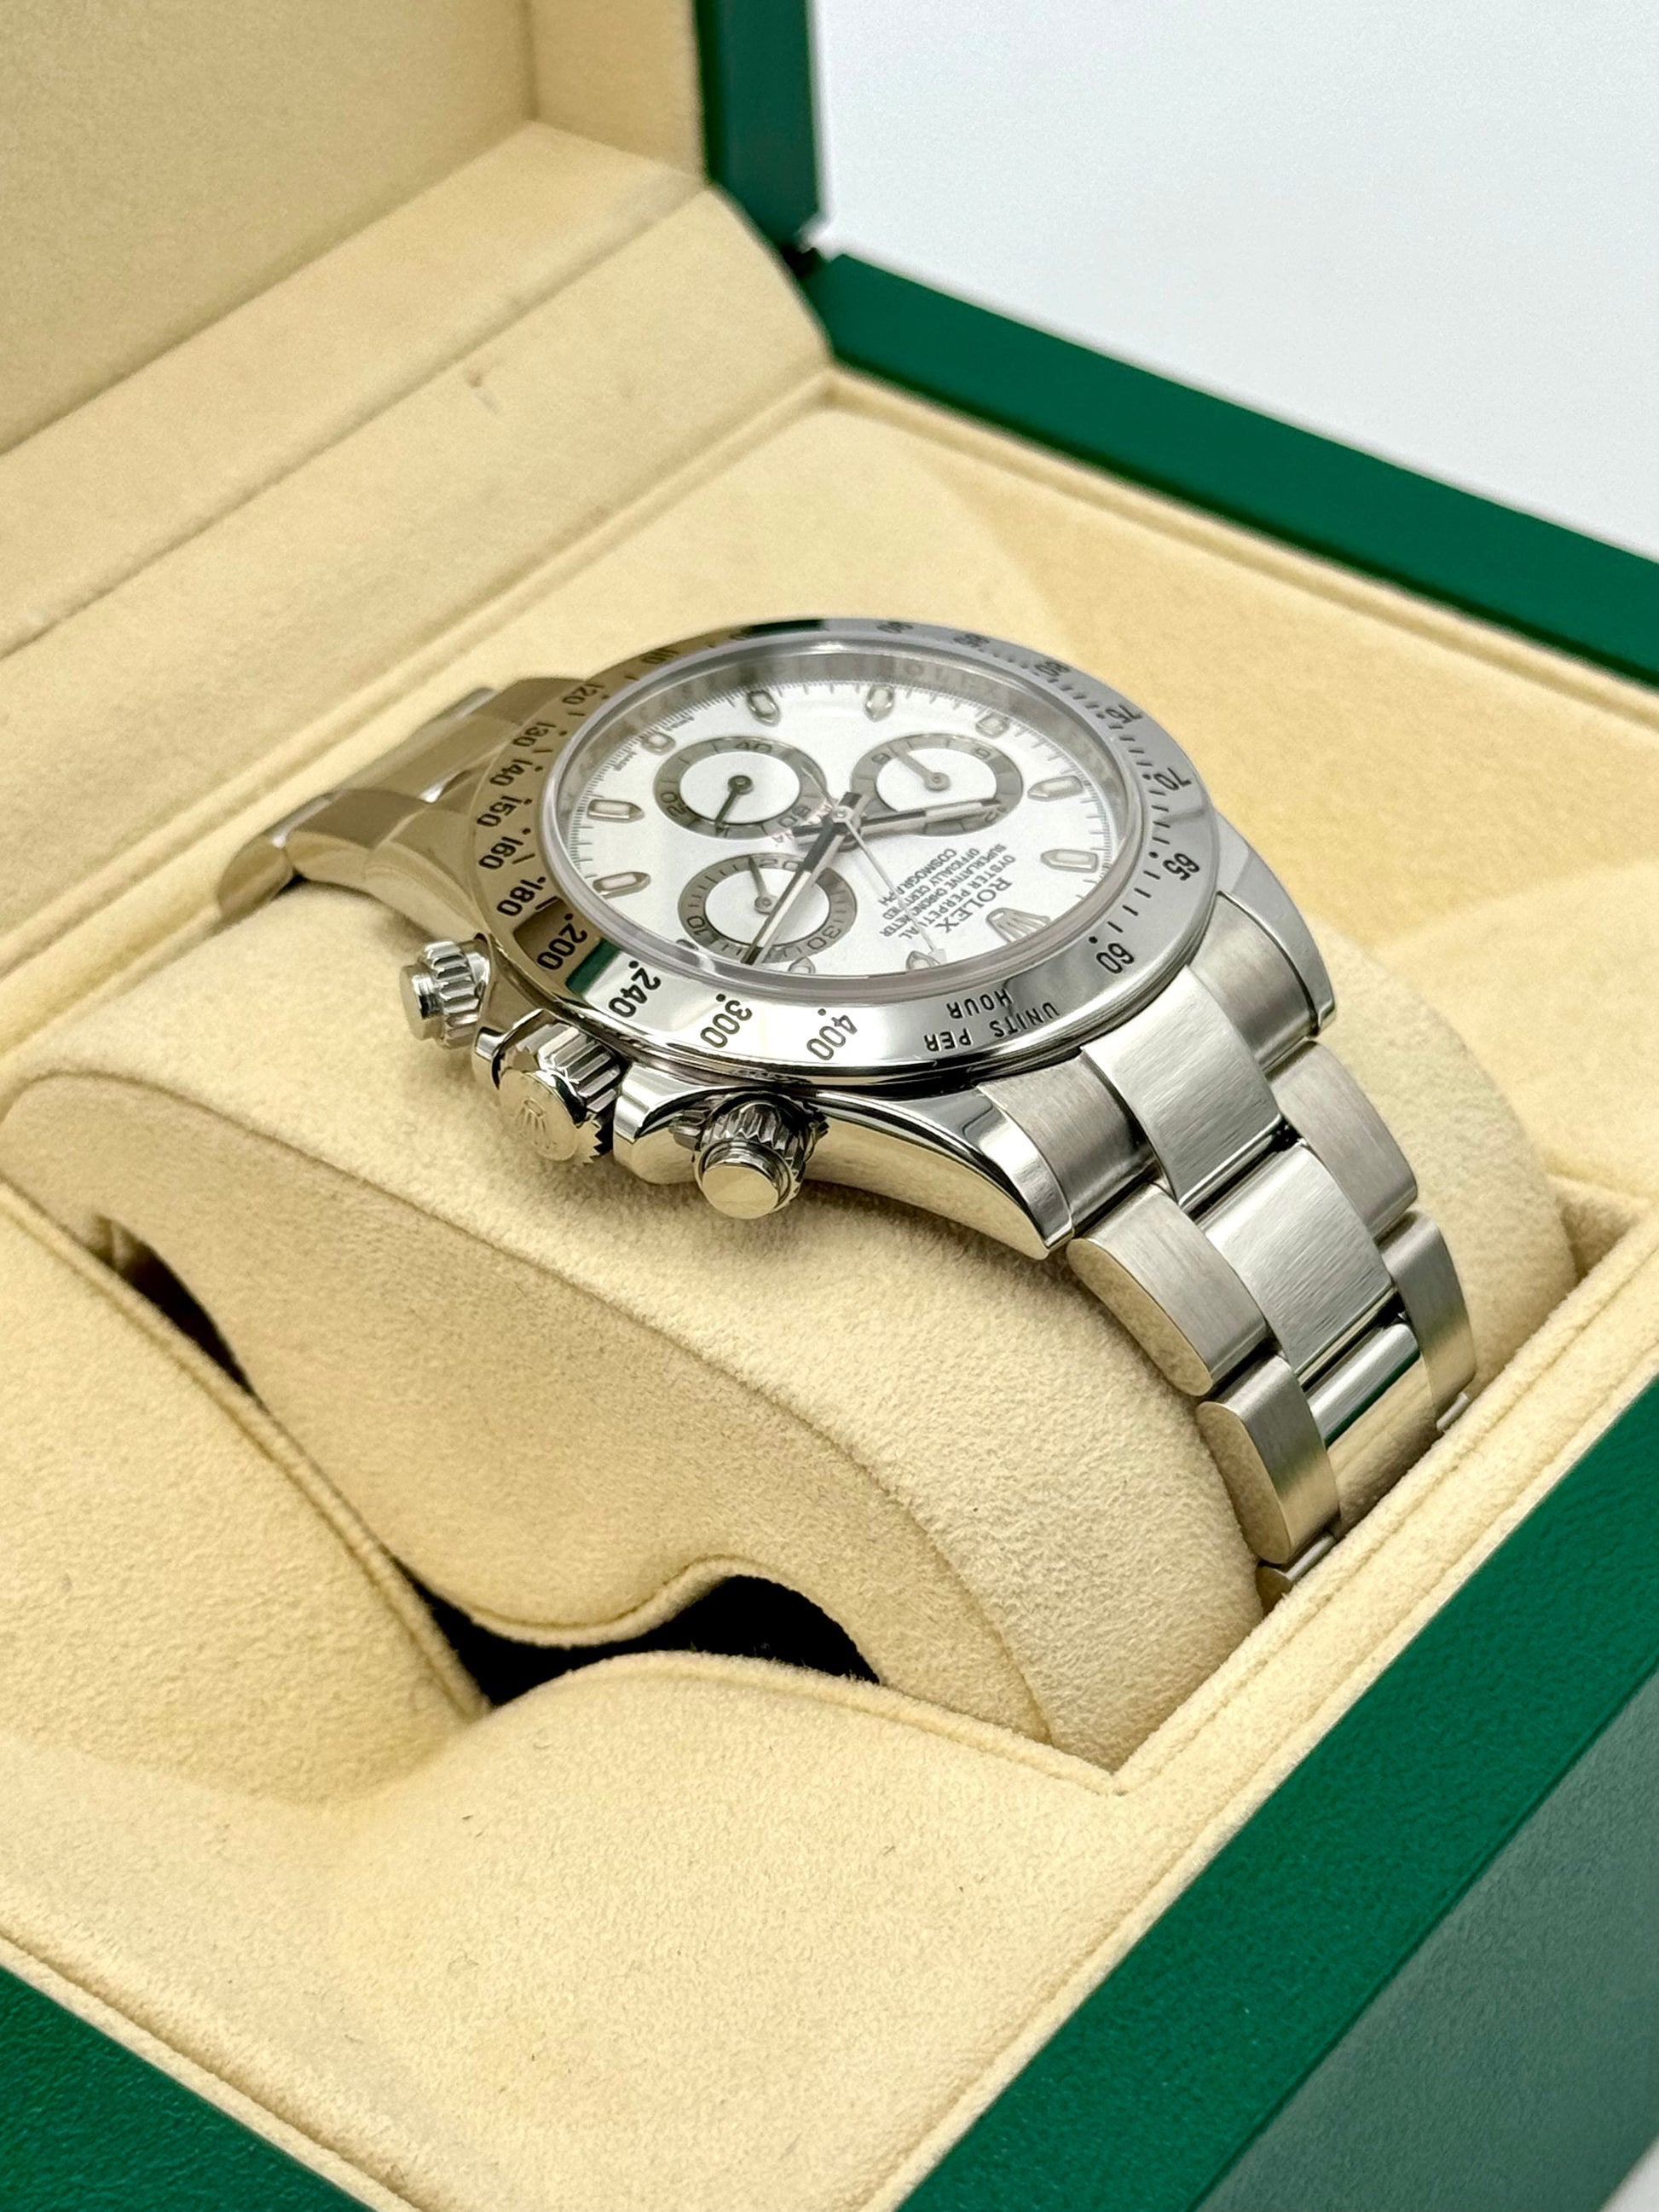 2015 Rolex Daytona 40mm 116520 Stainless Steel White Dial - MyWatchLLC